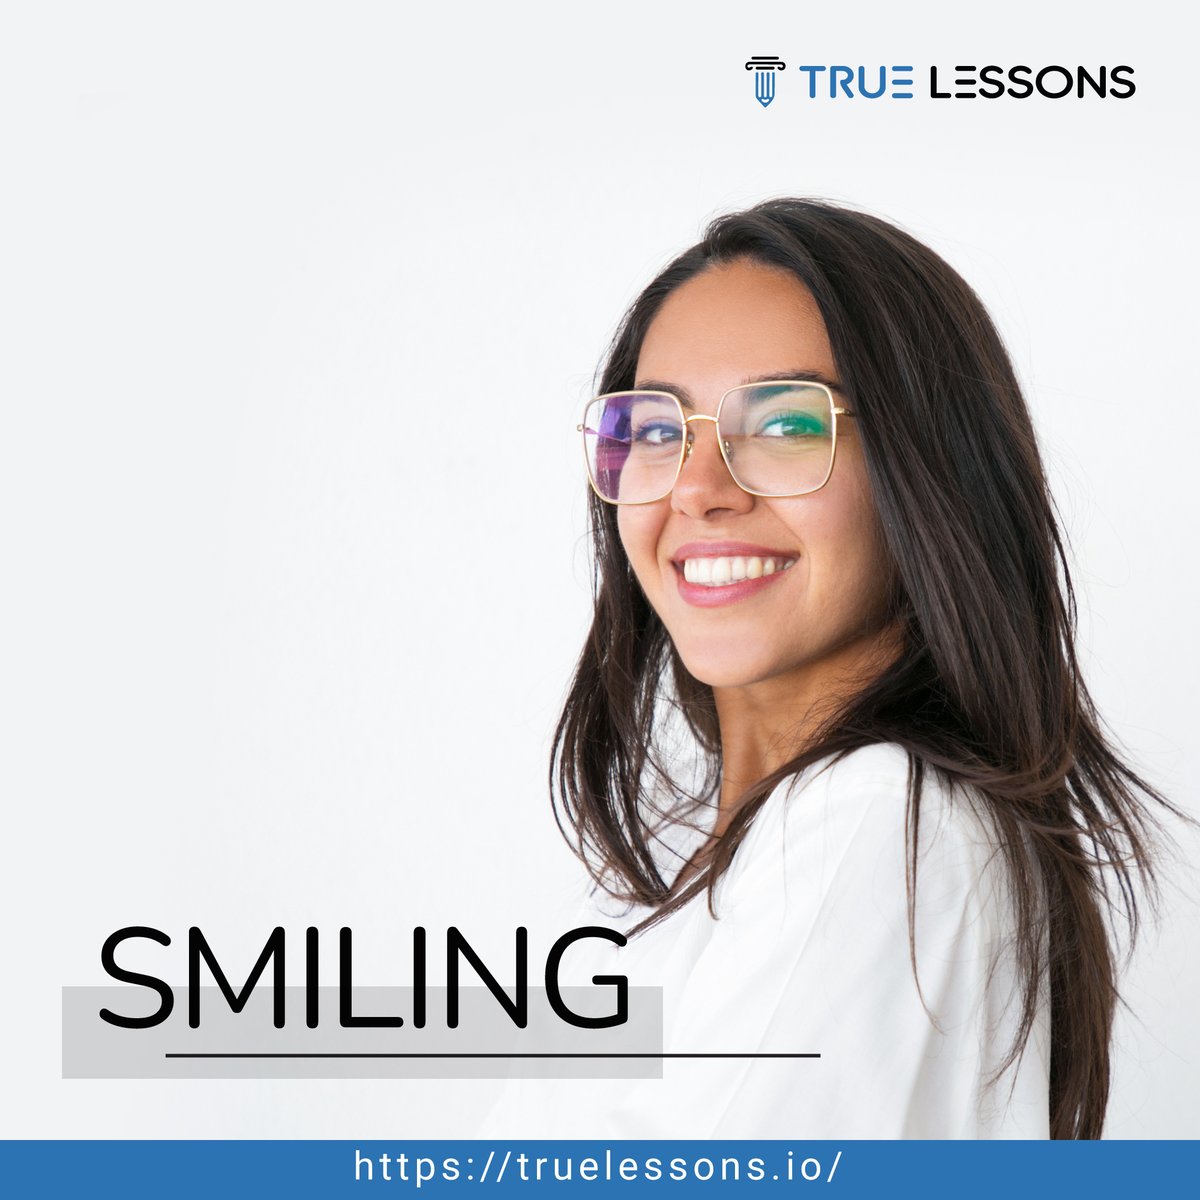 The right way of communication is necessary to progress in any career. True Lessons offers the best courses in communication skills and other career development courses to improve your career. Enroll today

#TrueLessons #clinicalresearchcareers #grooming #smile #listening